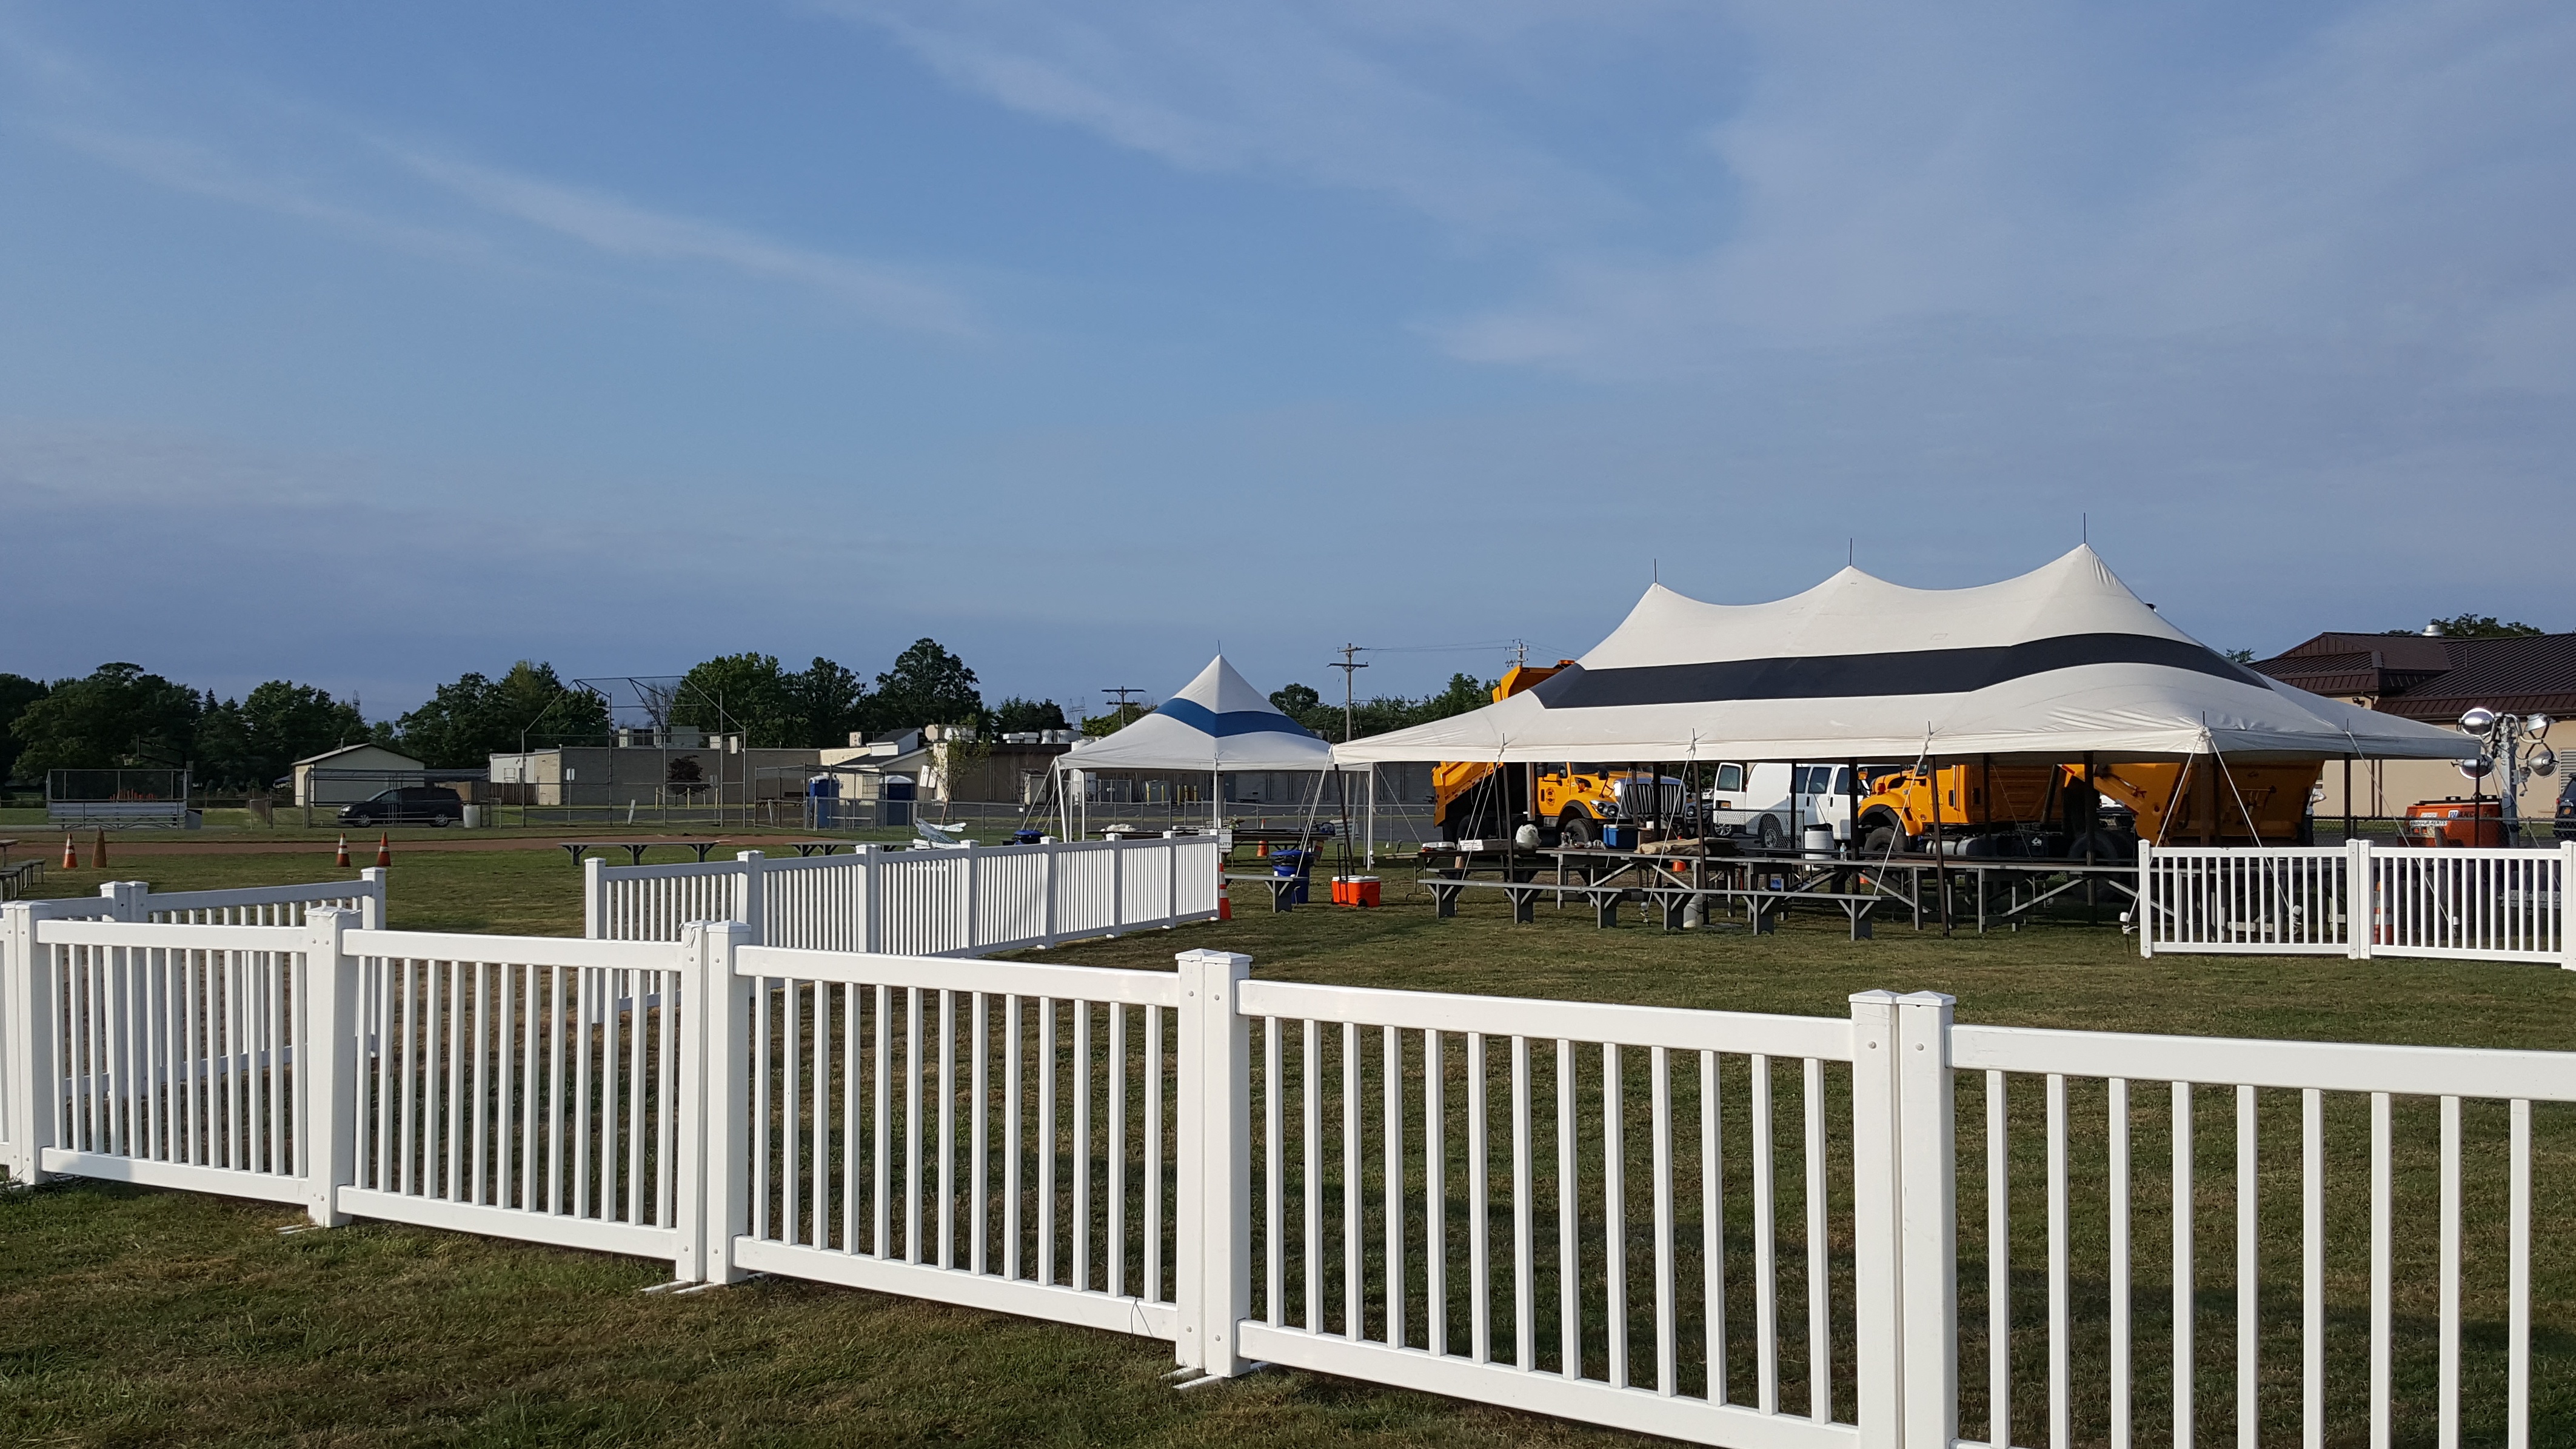 high-quality, white picket fence styled pedestrian fencing with event tent in background